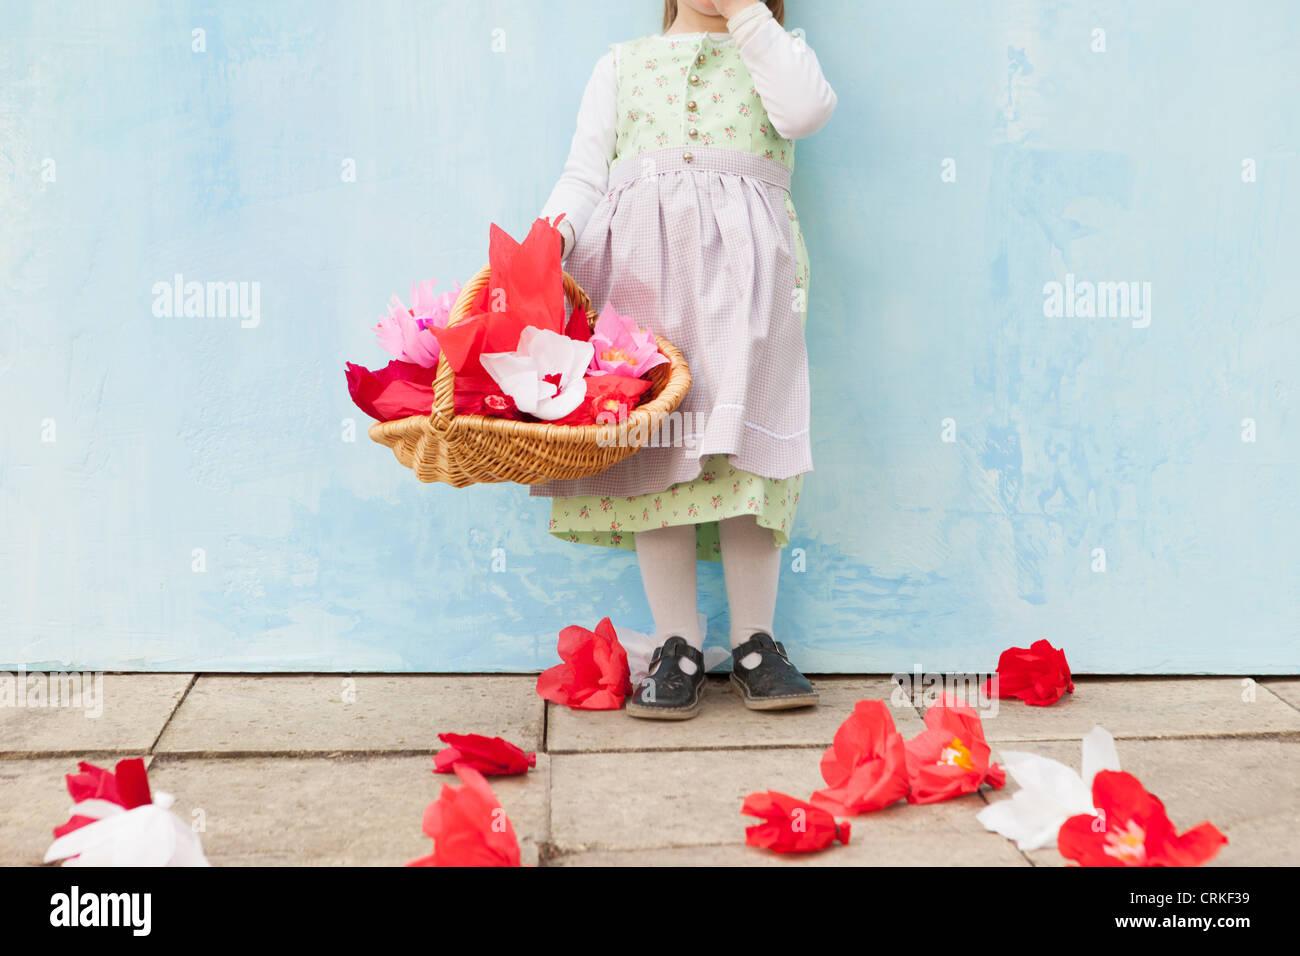 Girl holding basket of paper flowers Stock Photo